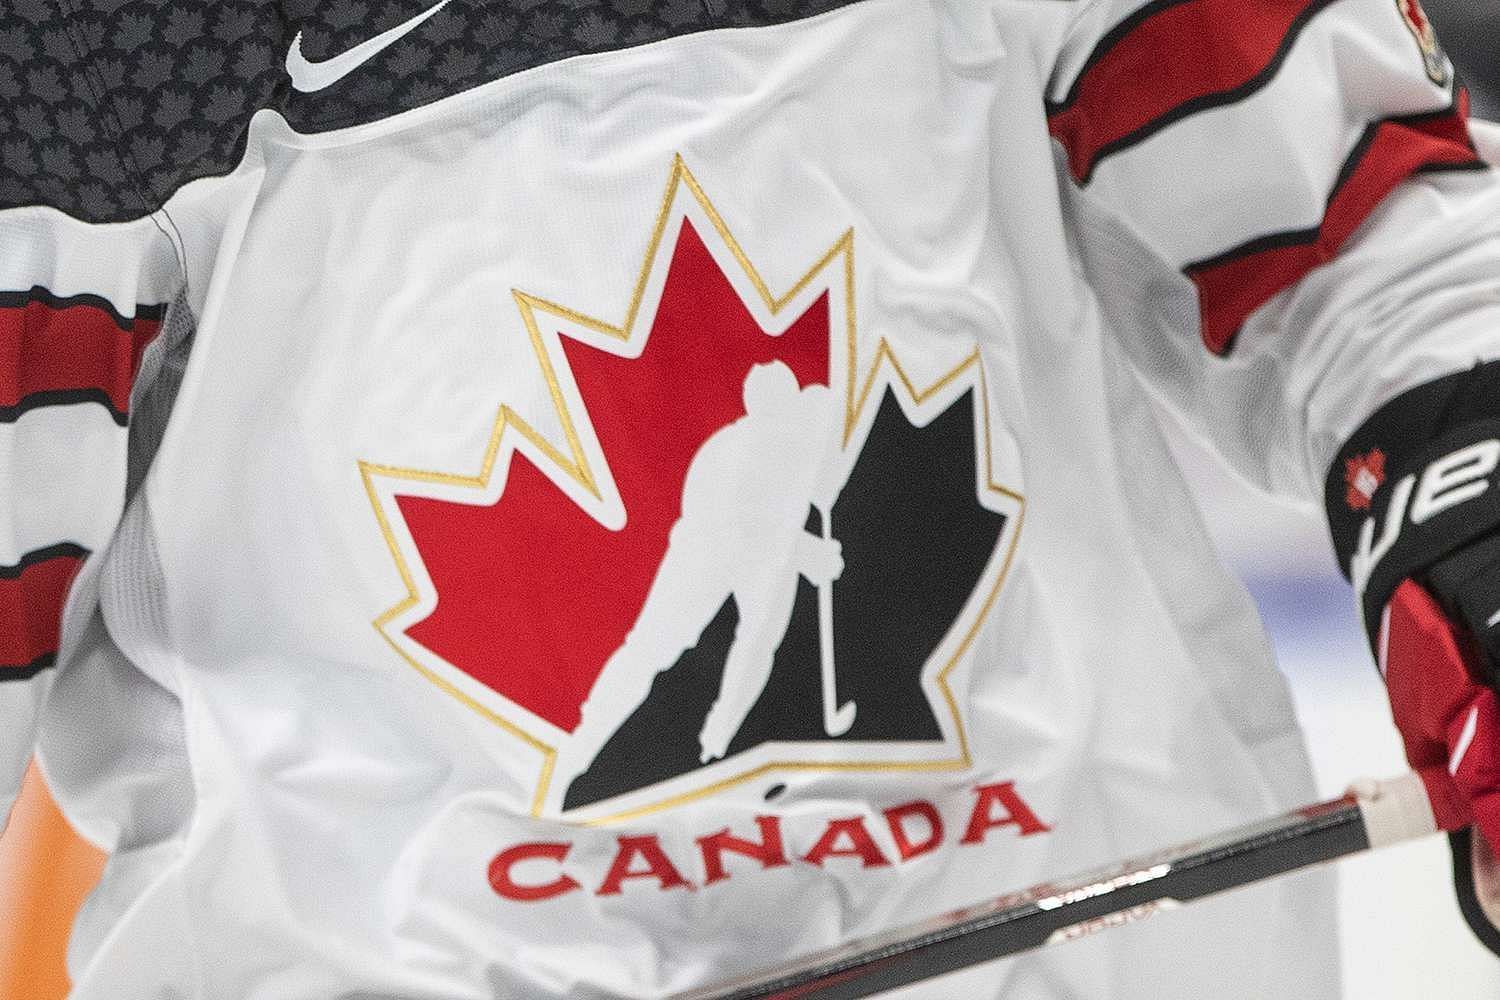 Hockey Canada has released a statement following the charges brought against five members of the 2018 Hockey Canada Team